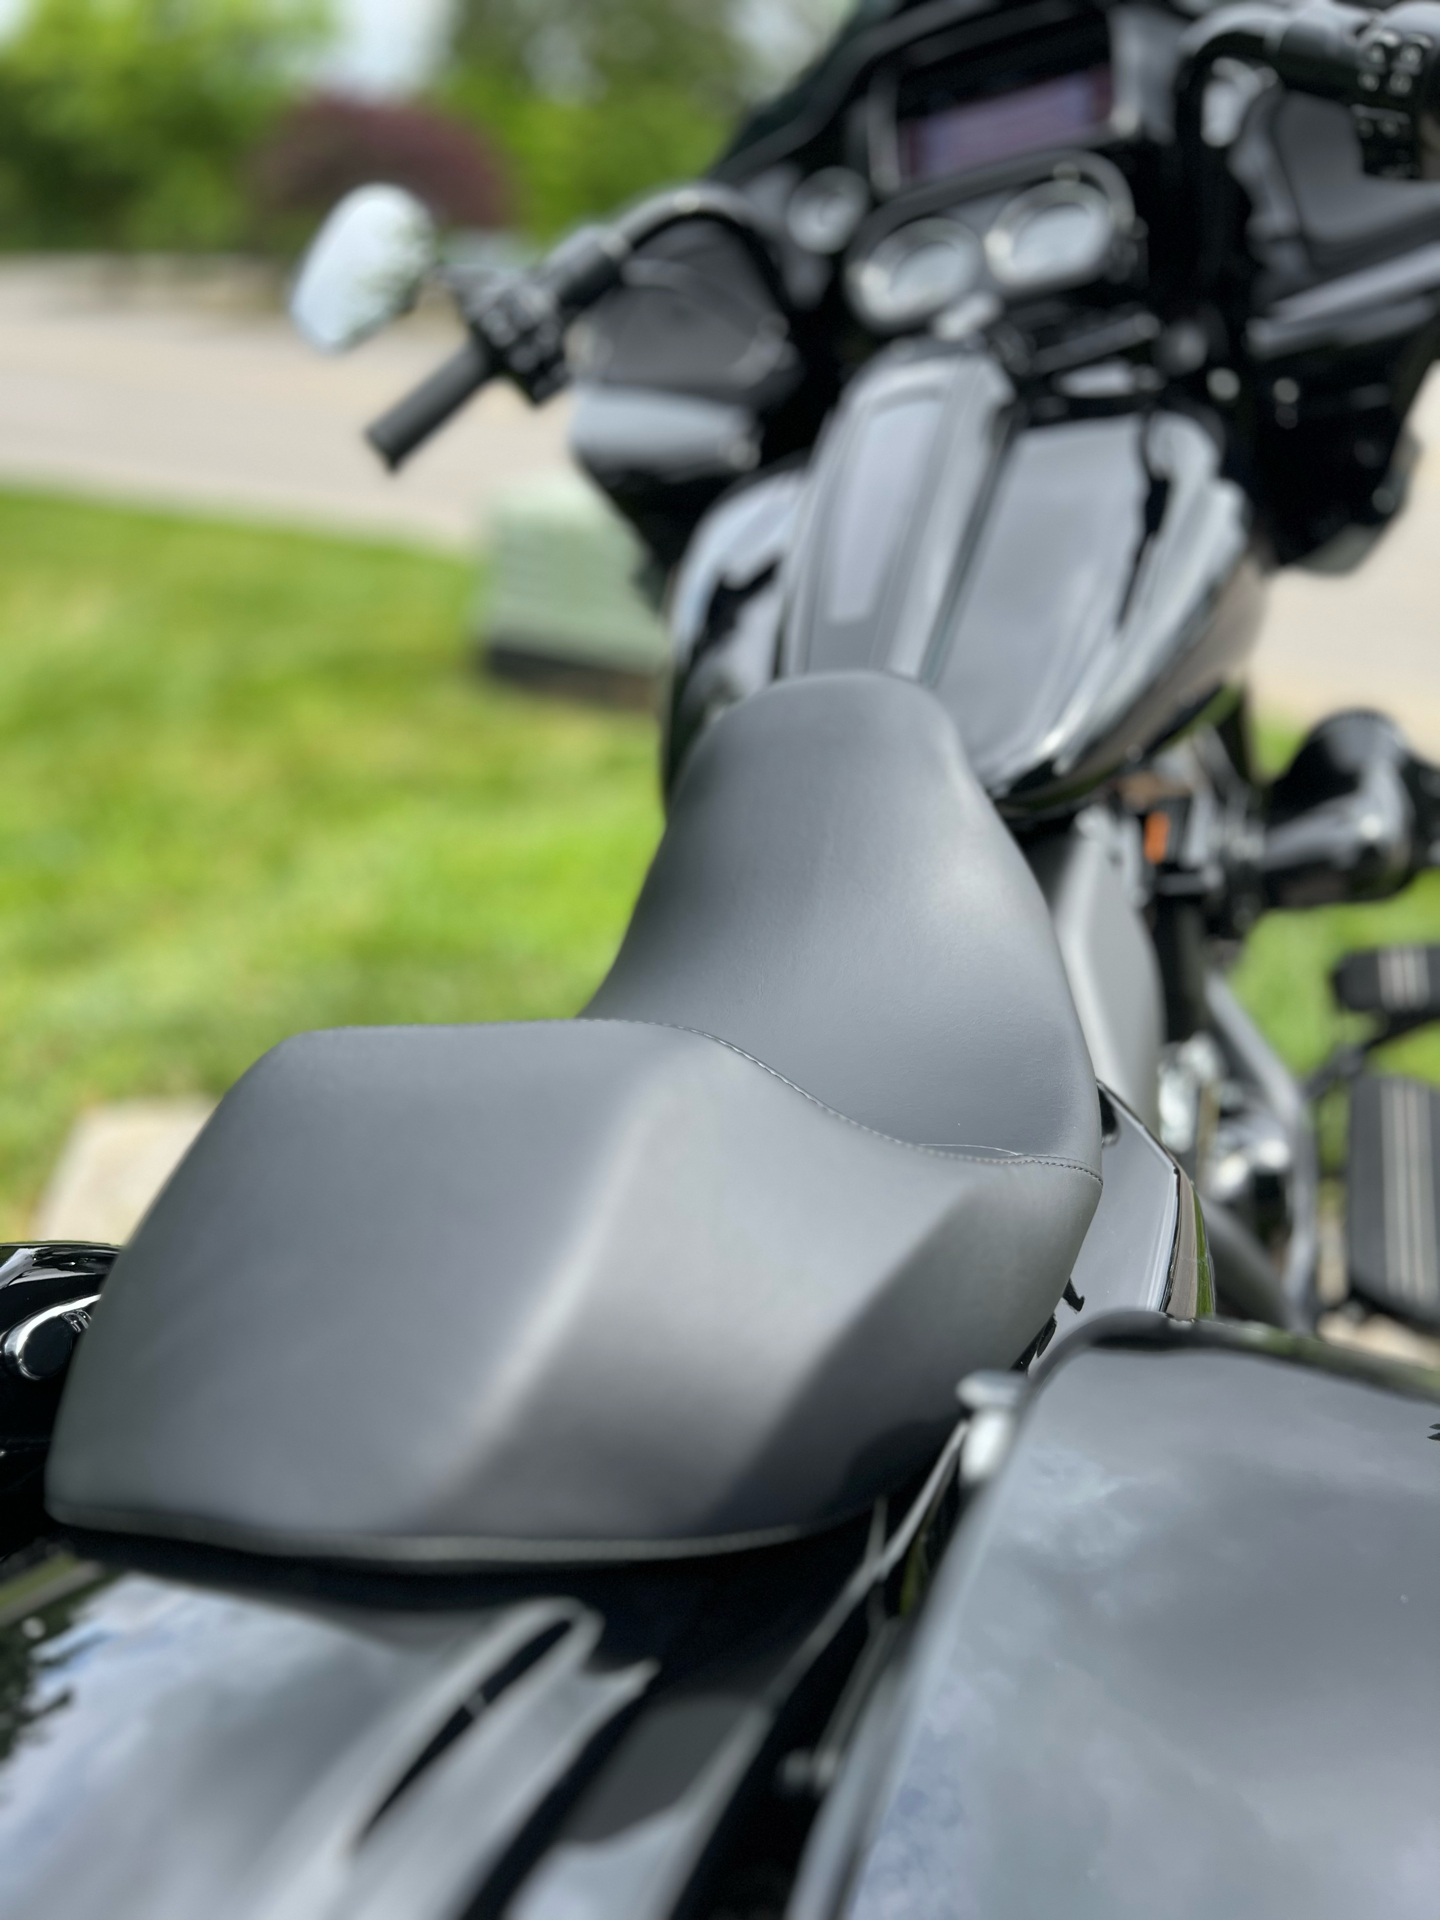 2023 Harley-Davidson Road Glide® ST in Franklin, Tennessee - Photo 18